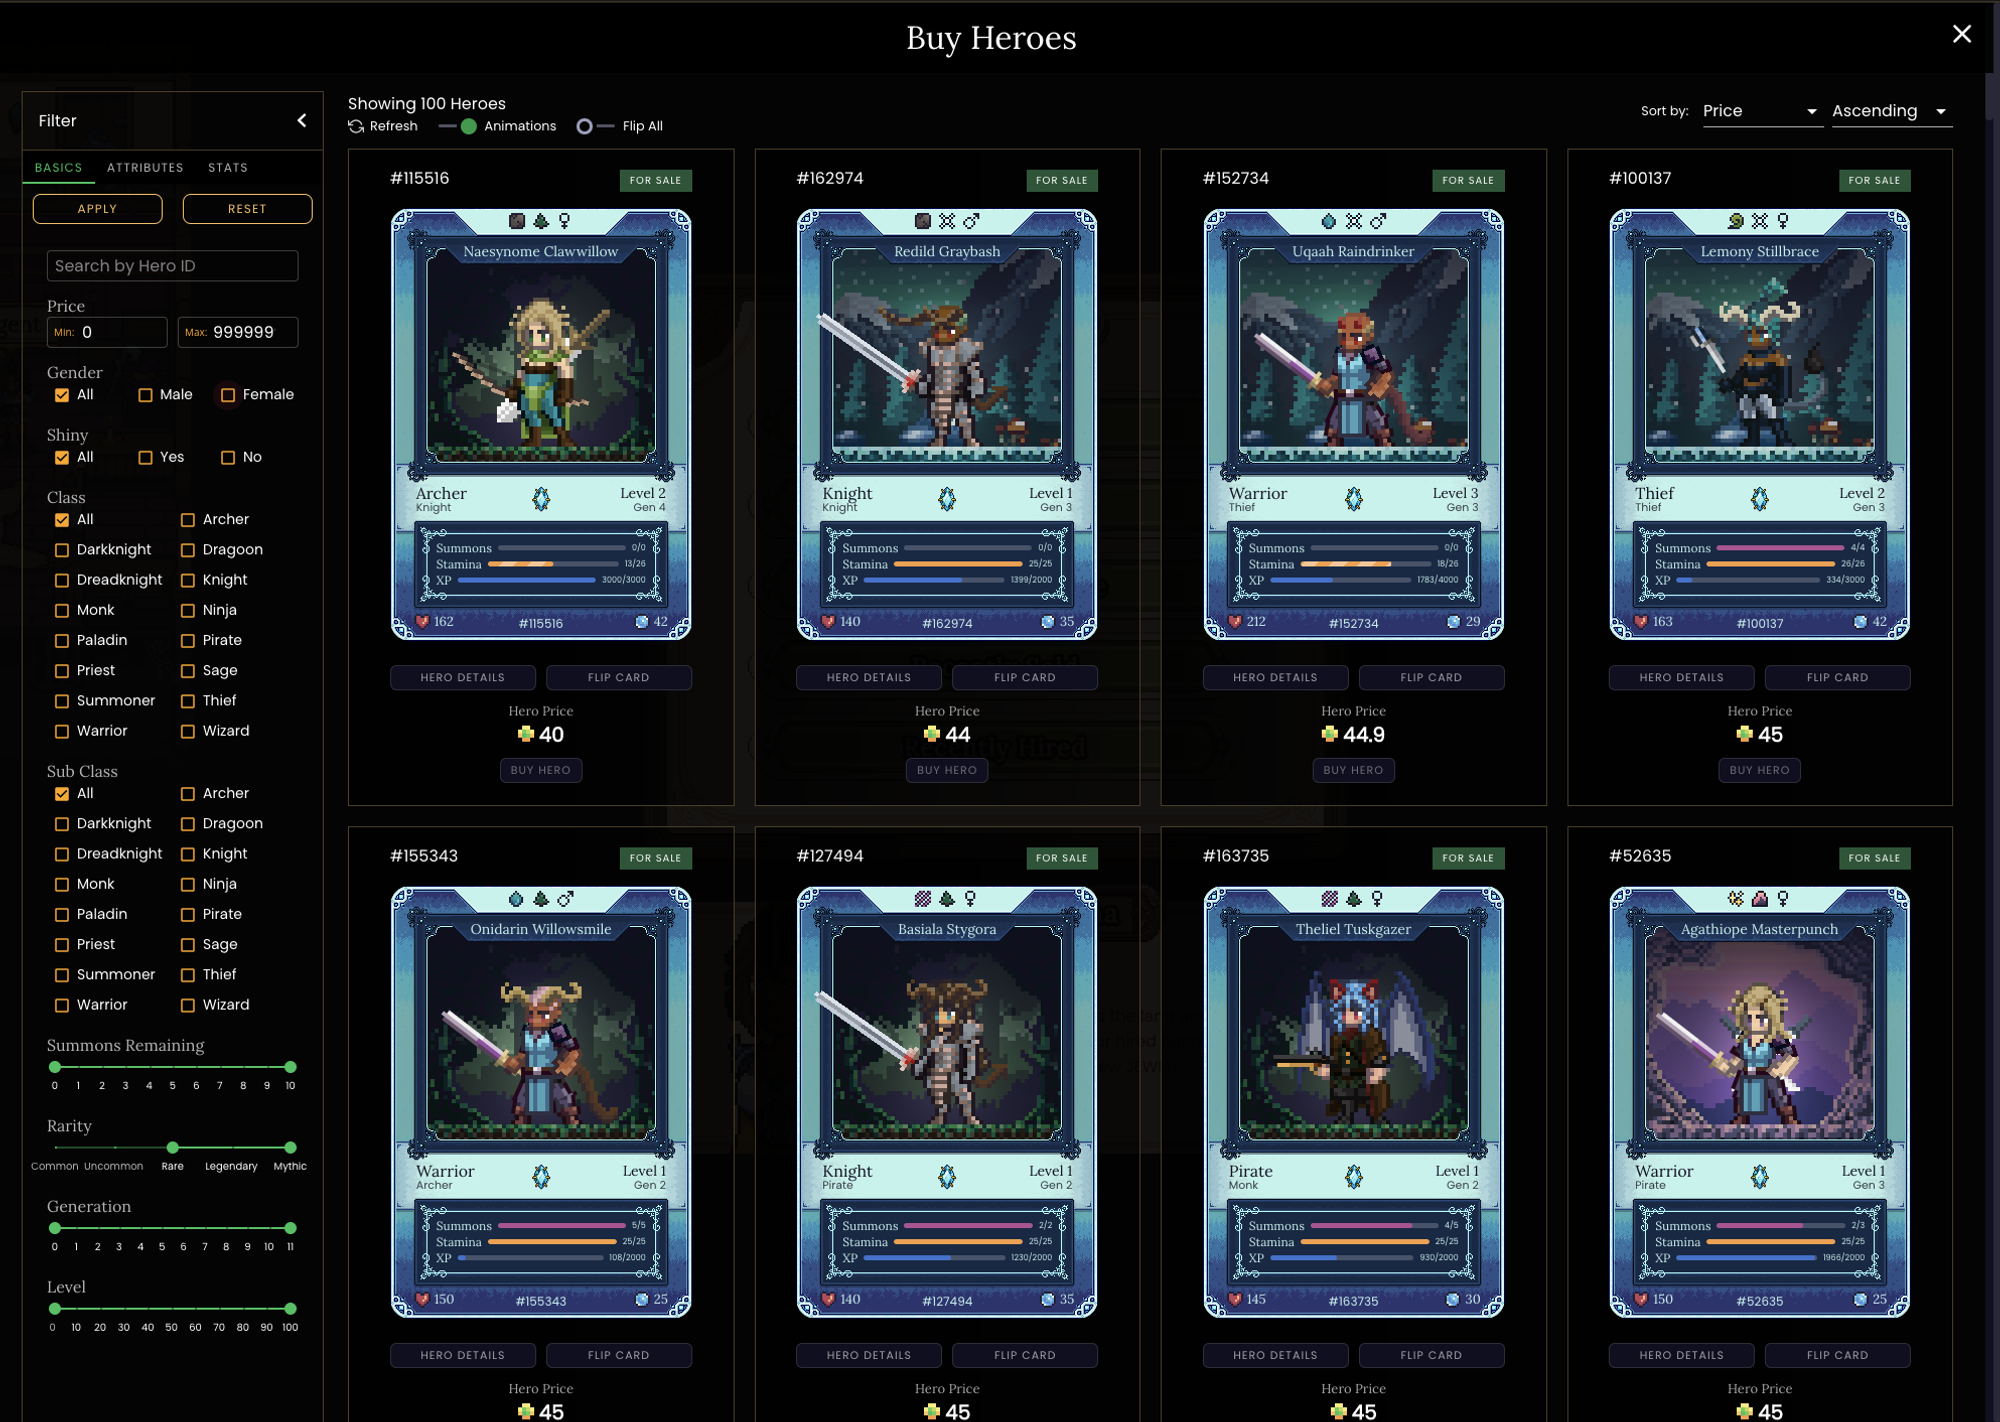 Screenshot of what the marketplace/UI for Heros looks like